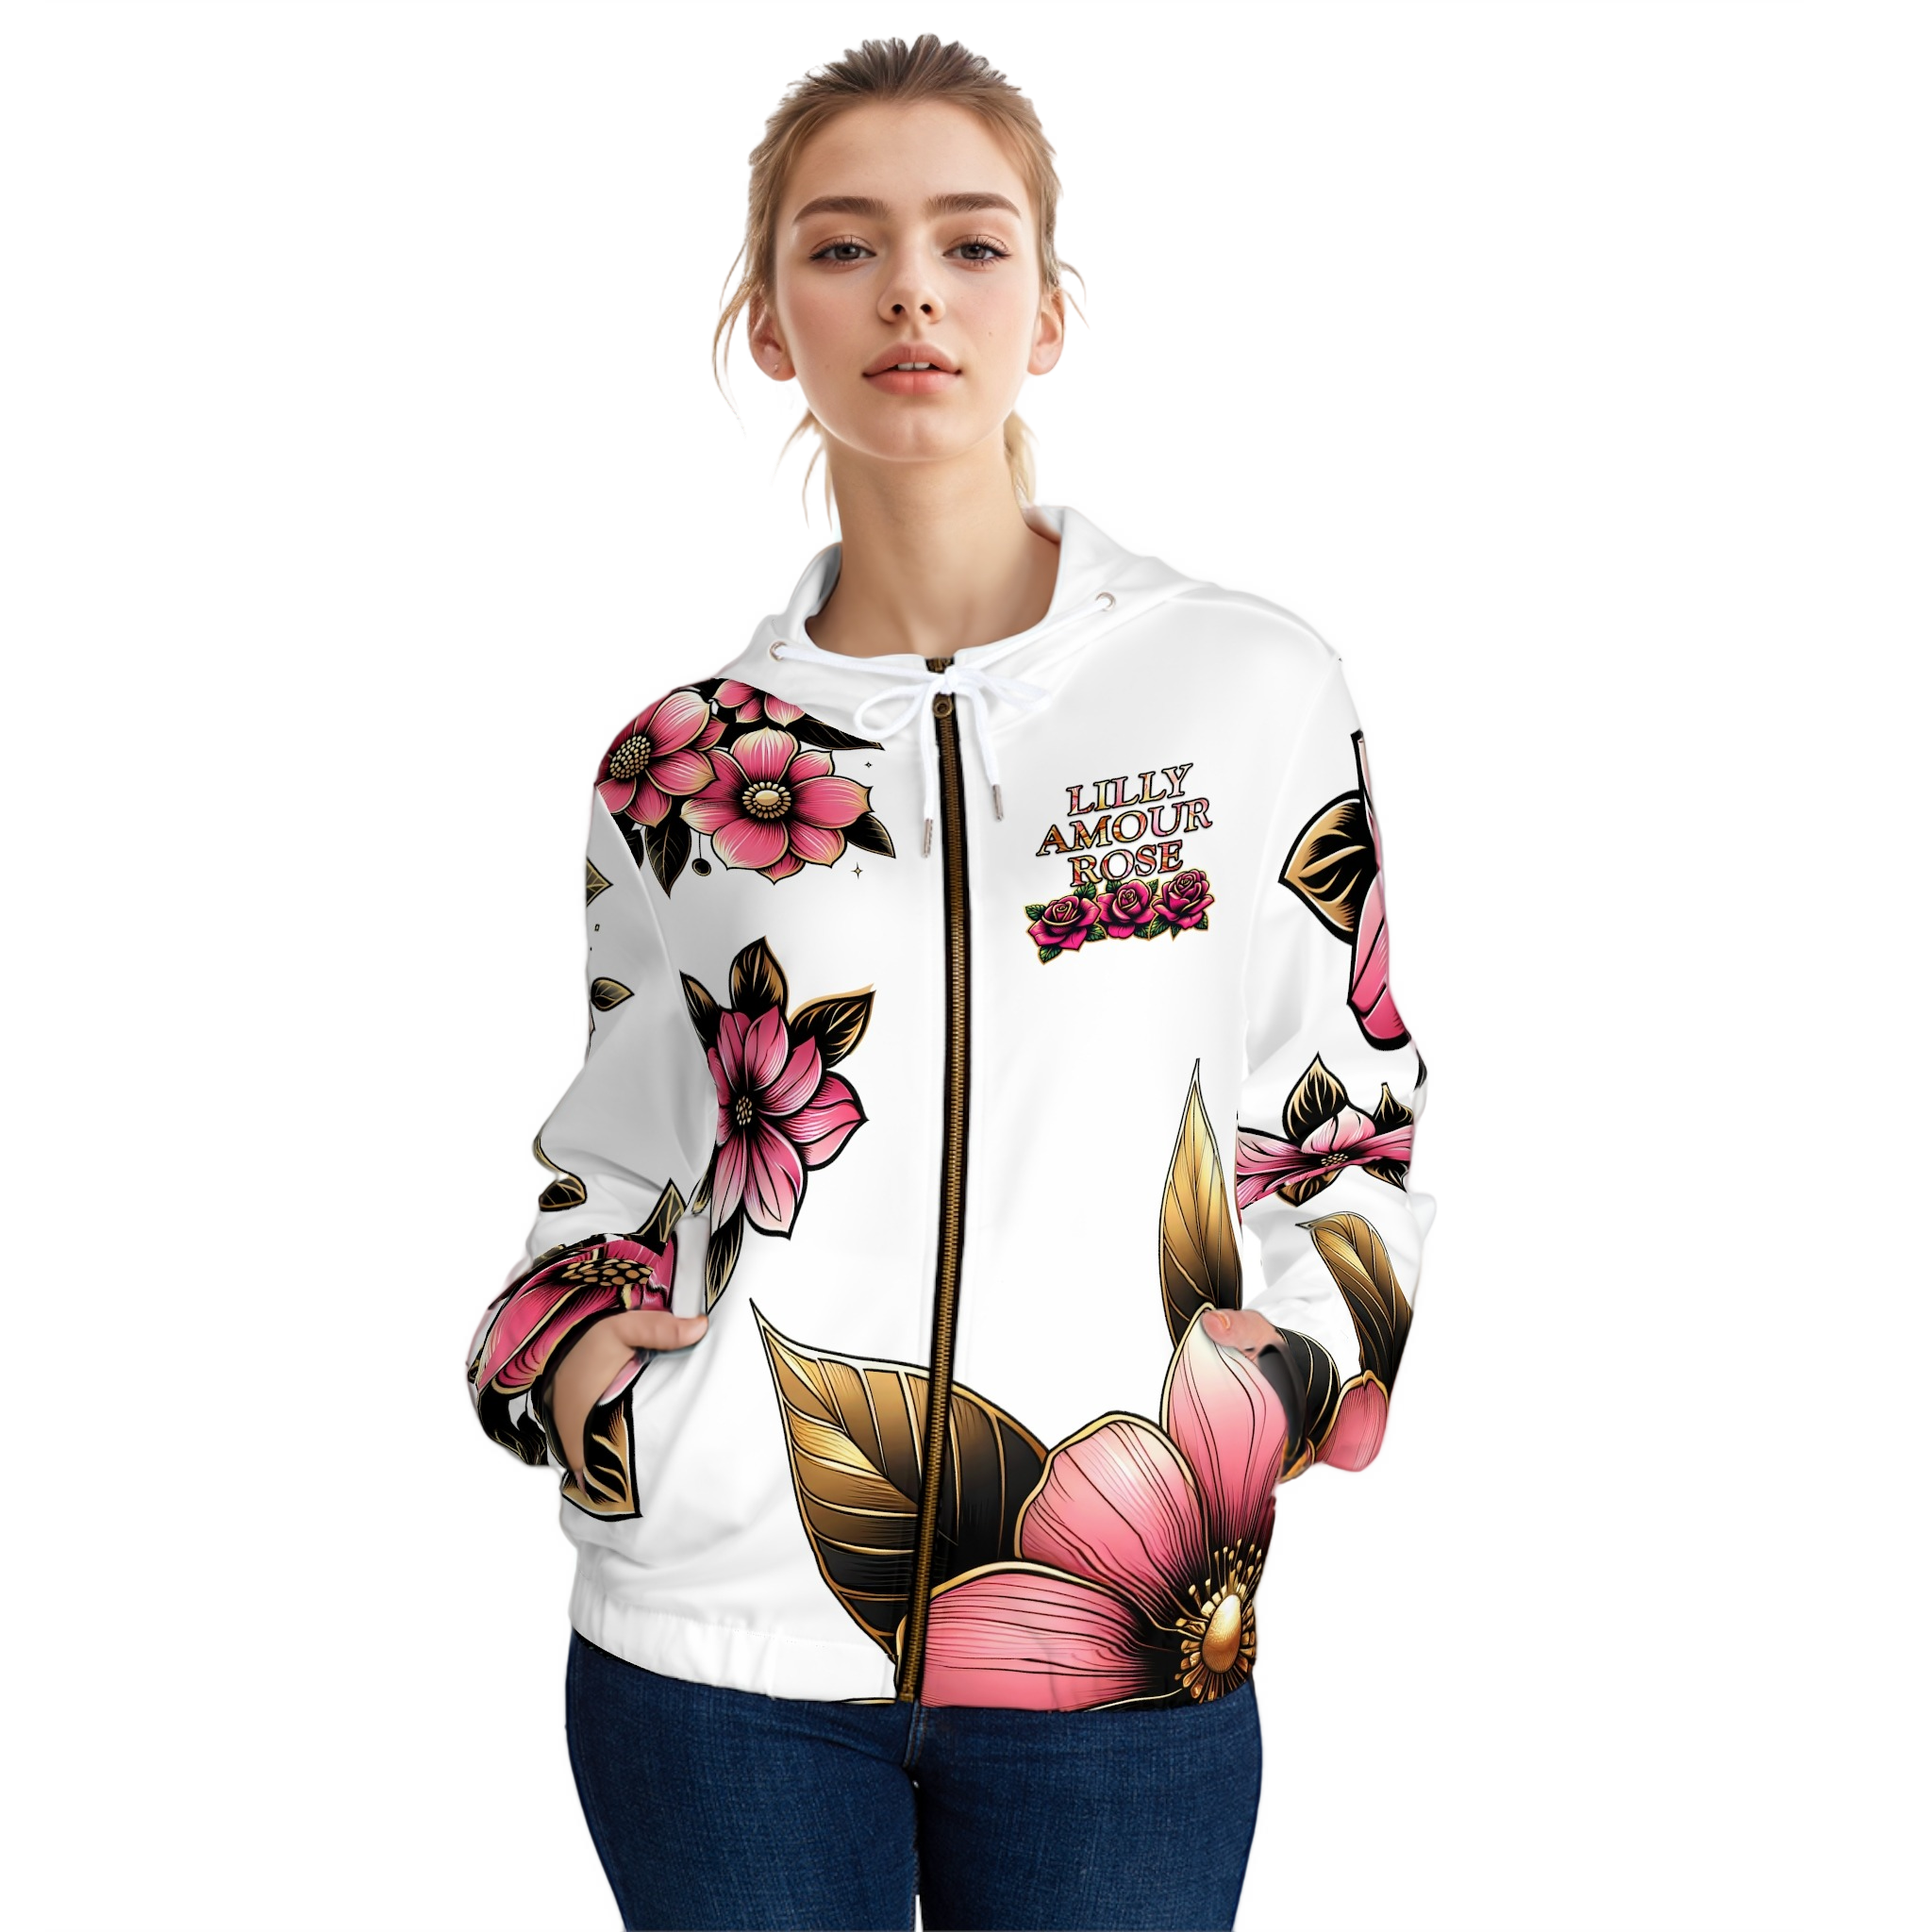 Lilly Amour Rose - Women’s Full-Zip Hoodie